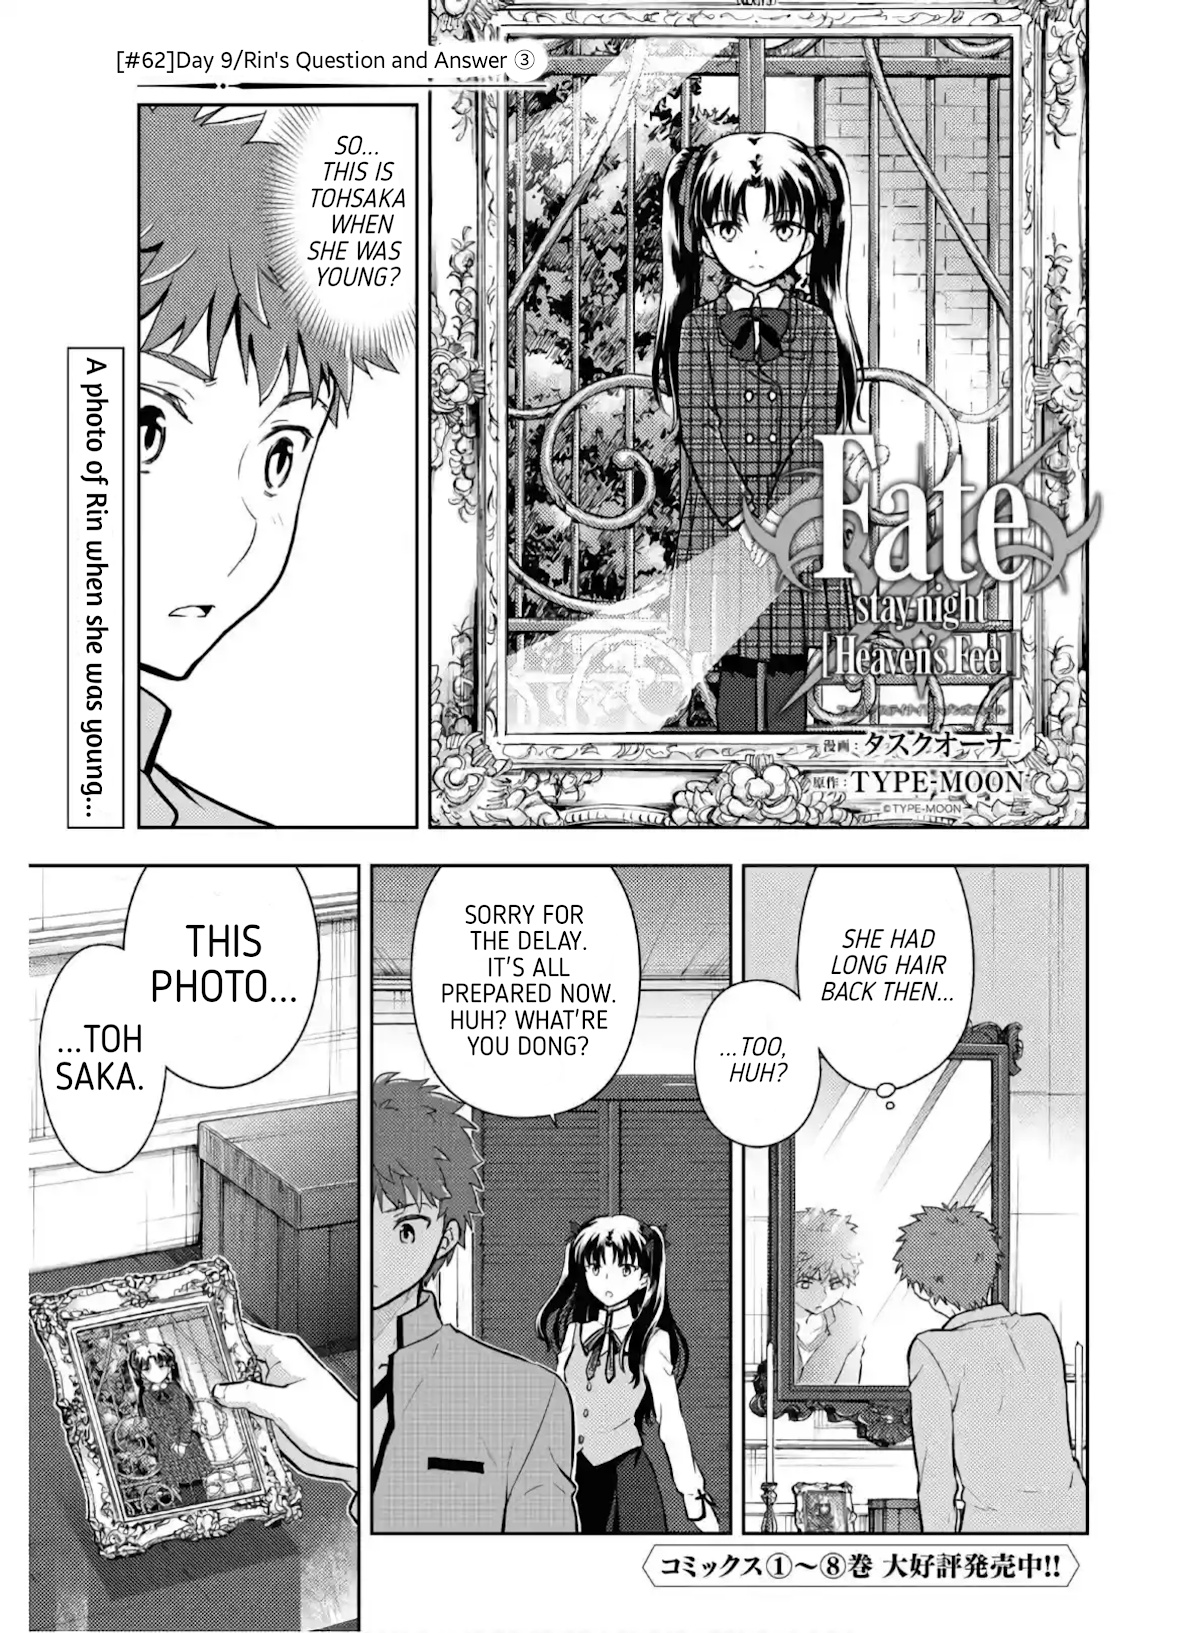 Fate/stay Night - Heaven's Feel Chapter 62: Day 9 / Rin's Questions And Answers (3) - Picture 1